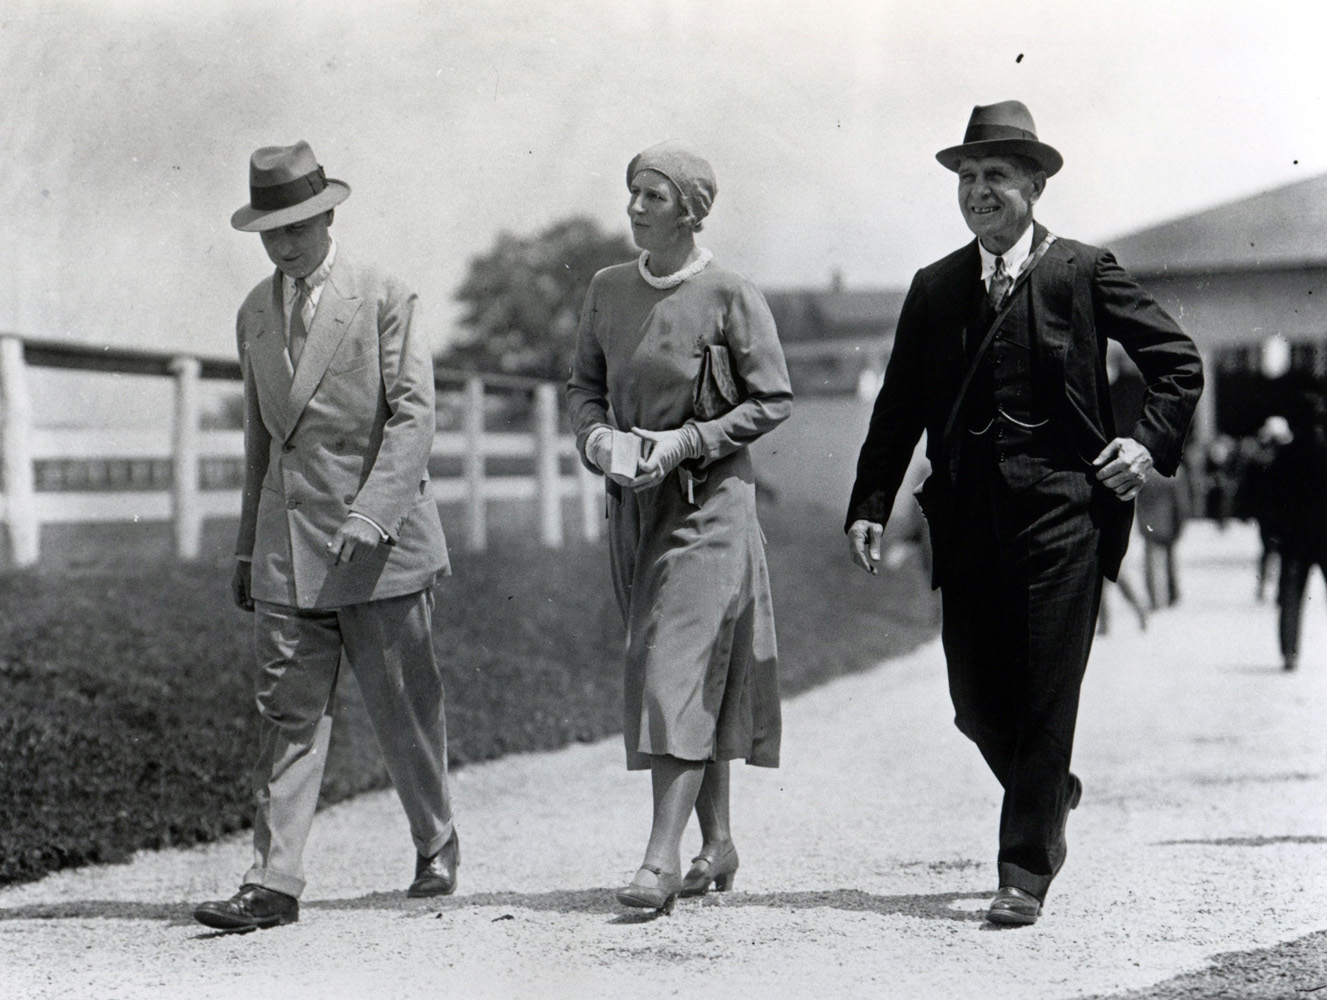 Thomas Hitchcock (on right) walking with an unidentified couple on a farm (Keeneland Library Cook Collection/Museum Collection)